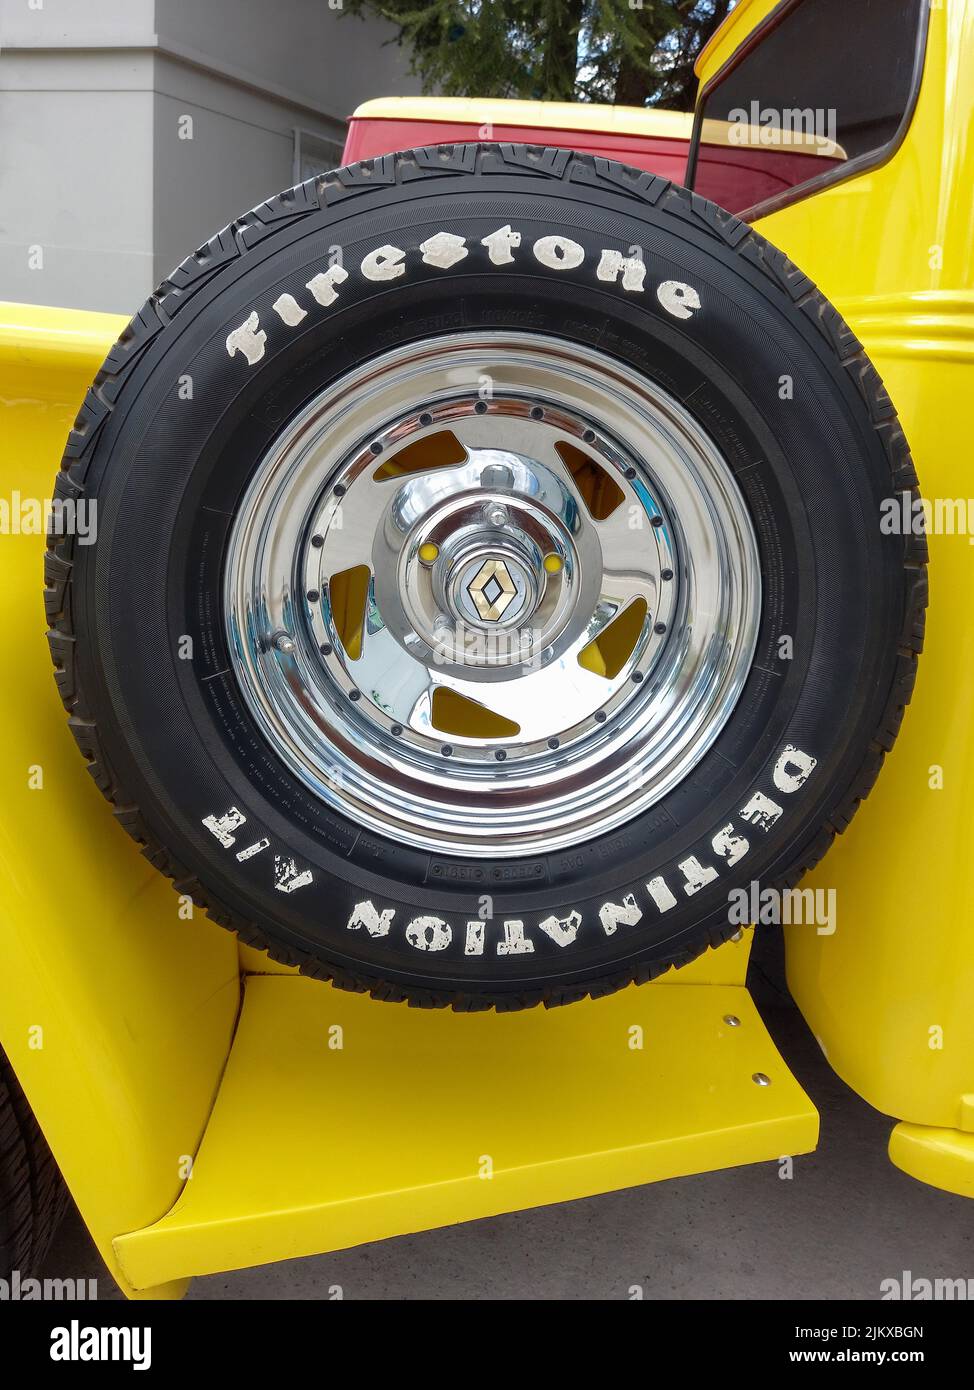 Avellaneda, Argentina - Apr 03, 2022: Firestone logo and brand on rubber tire. Spare wheel at the side of the bed of an old pickup truck. Traditional Stock Photo